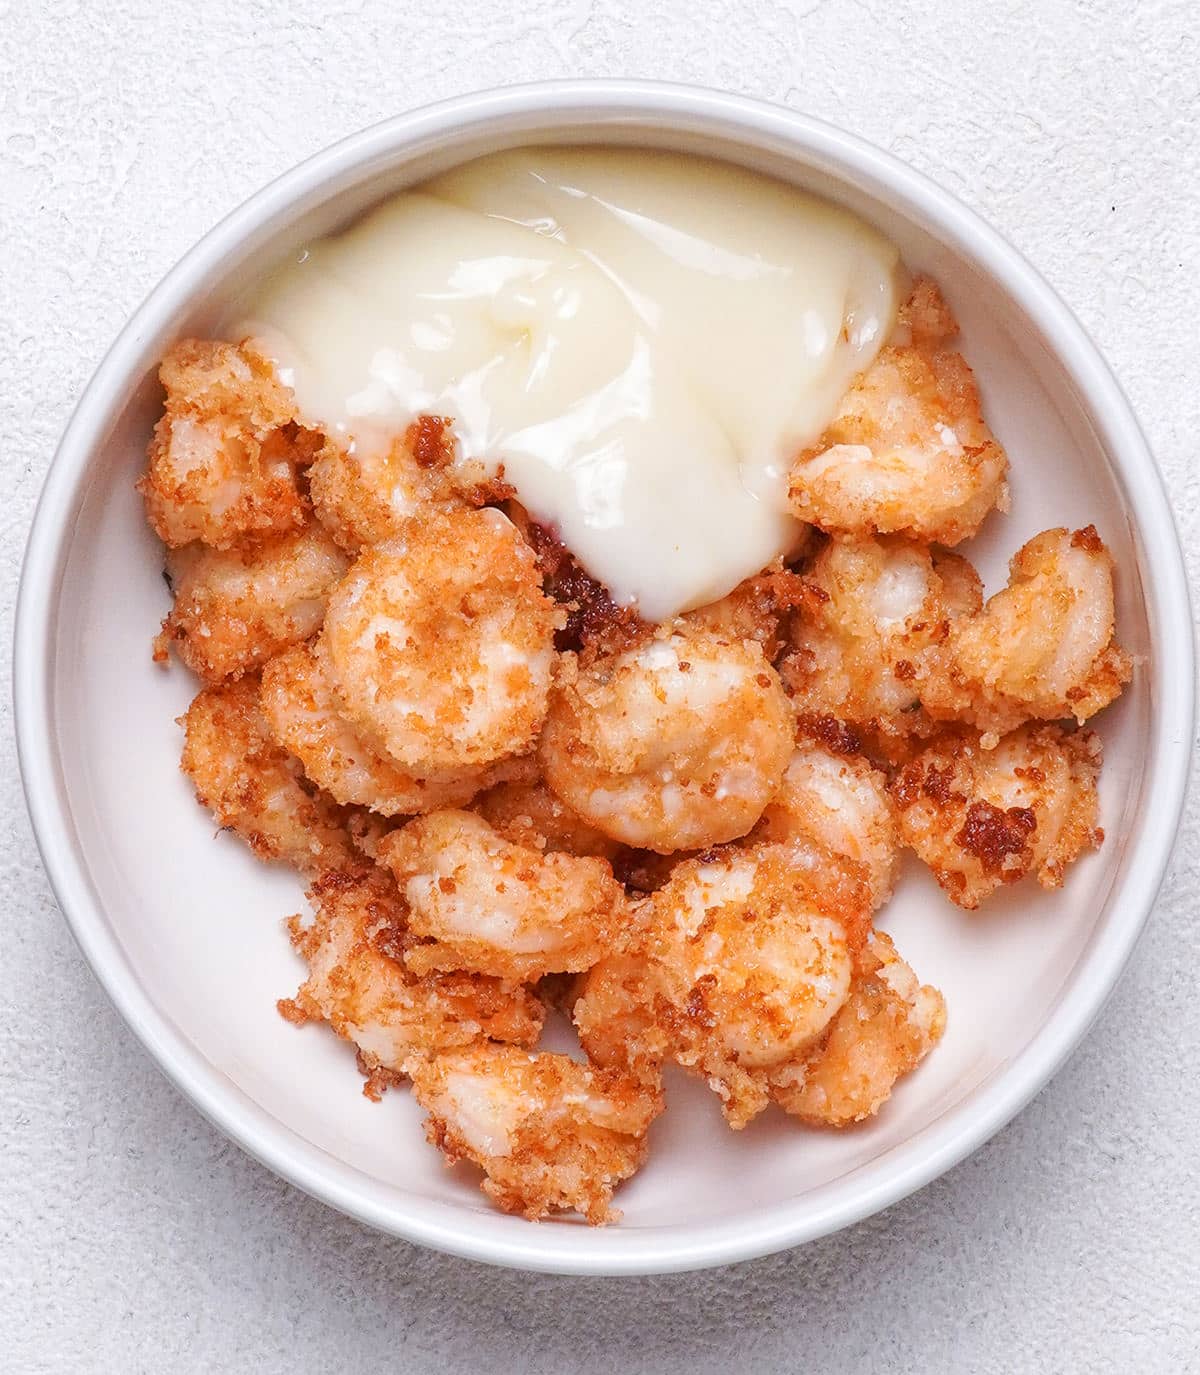 Fried seafood coated with white sauce.